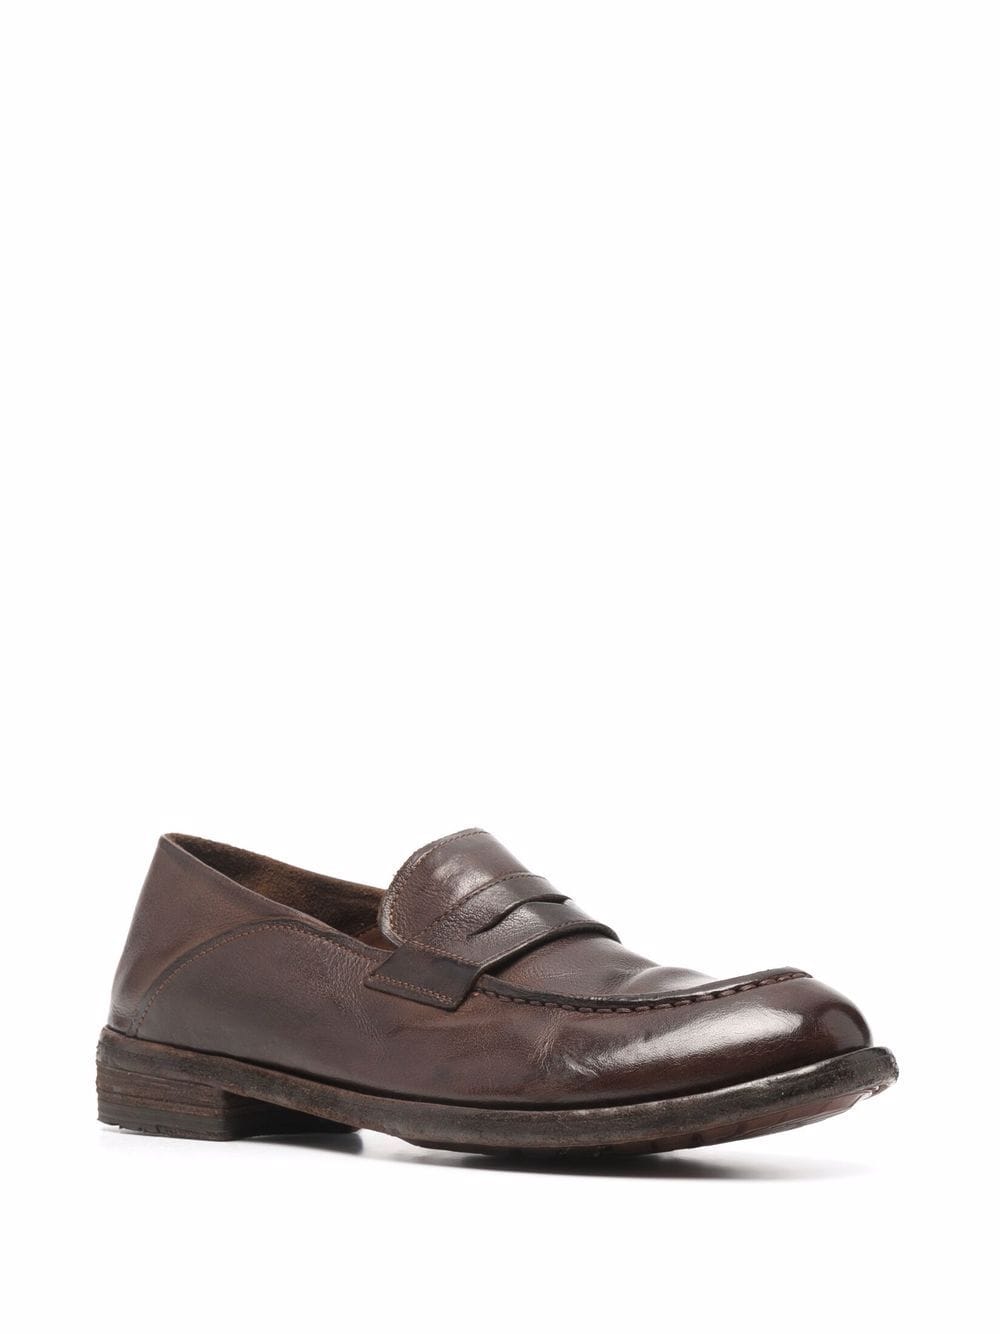 Officine Creative Lexicon Leather Loafers - Farfetch